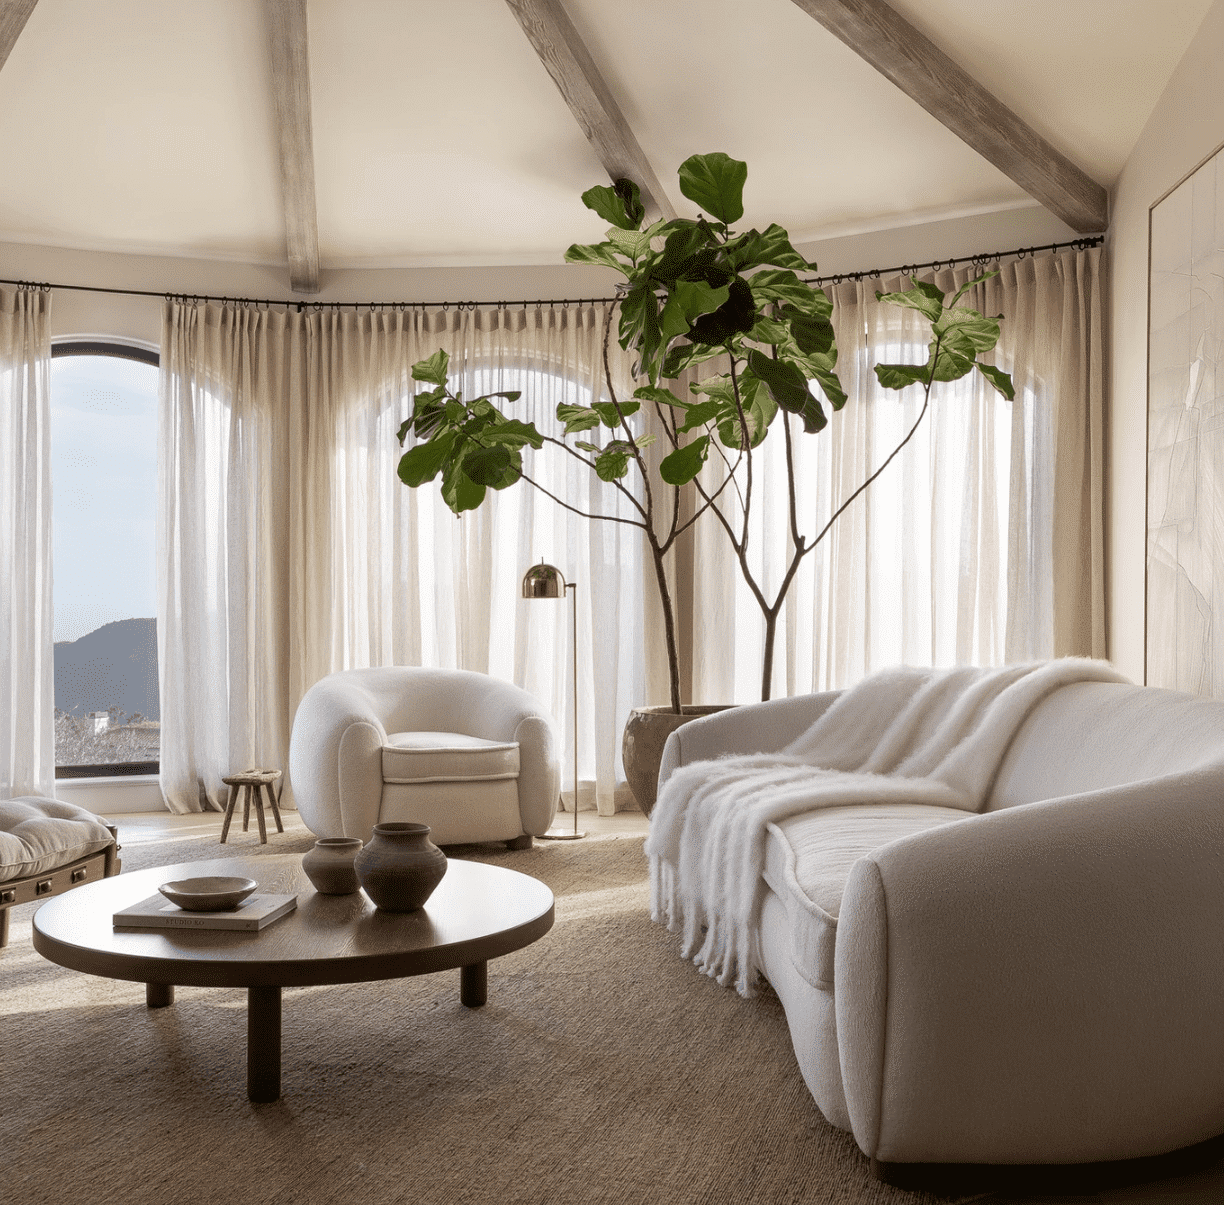 How to Balance Modern and Organic Elements in The Living Room